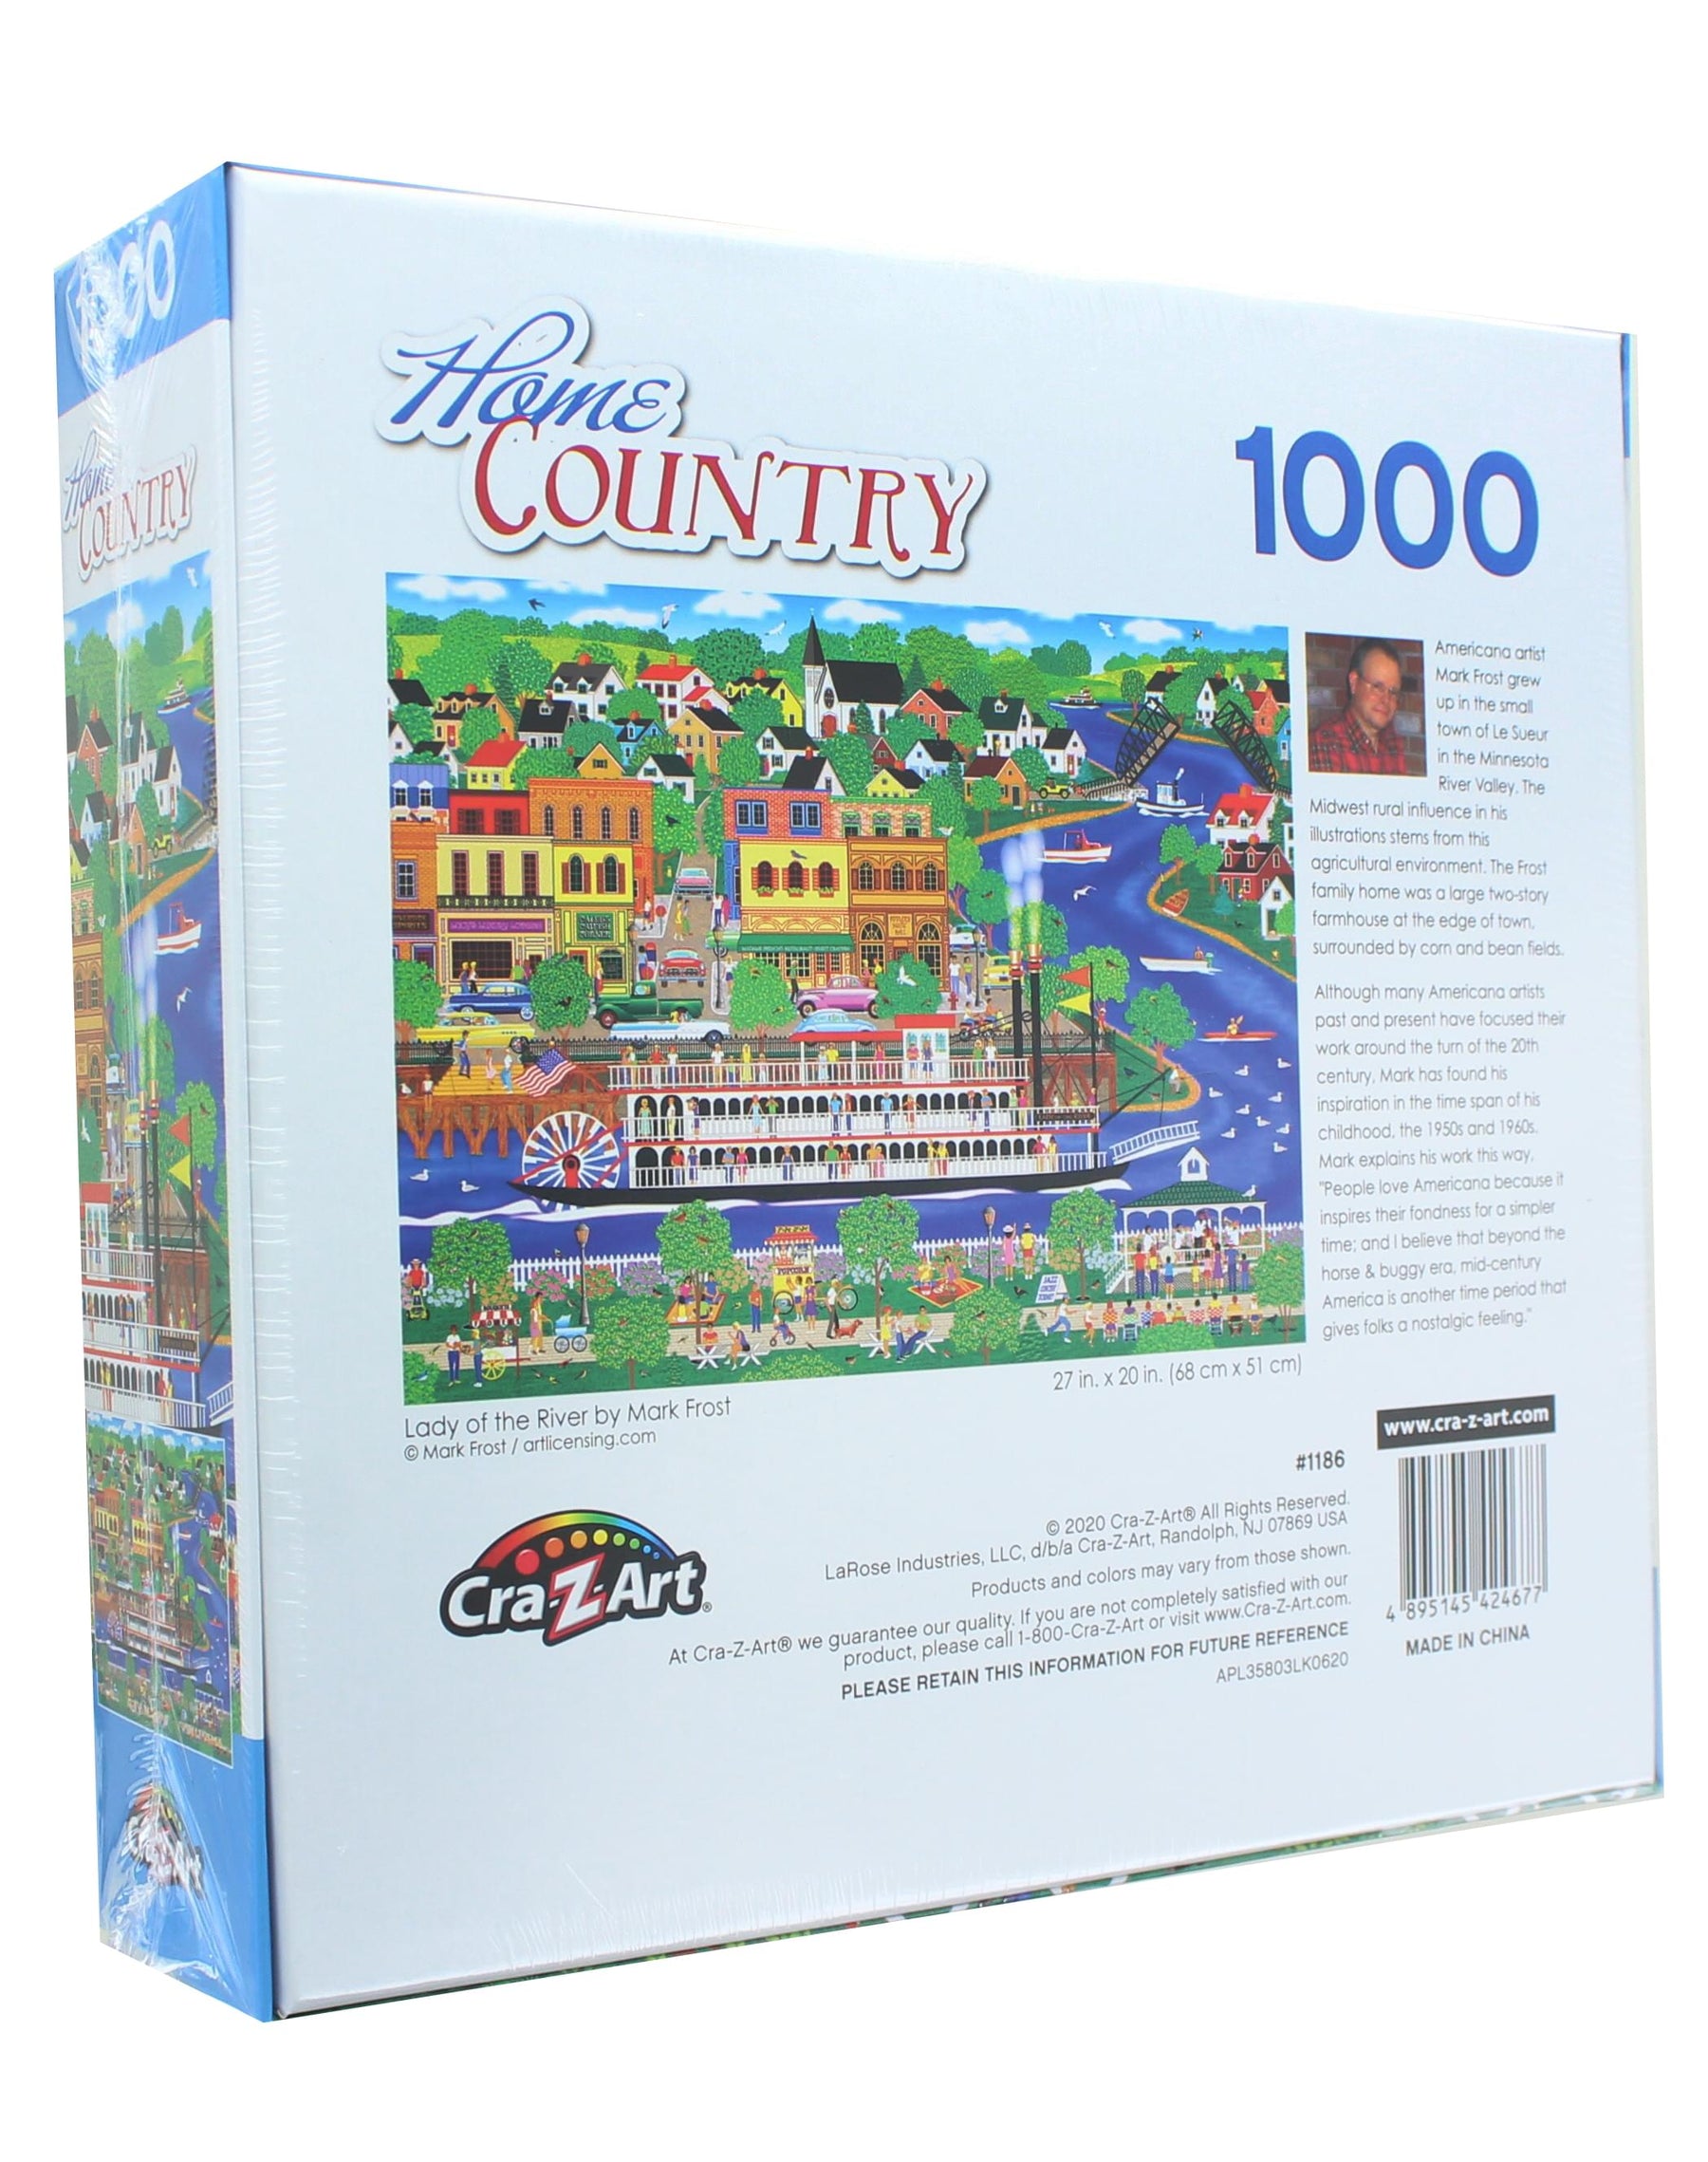 Lady of the River 1000 Piece Jigsaw Puzzle